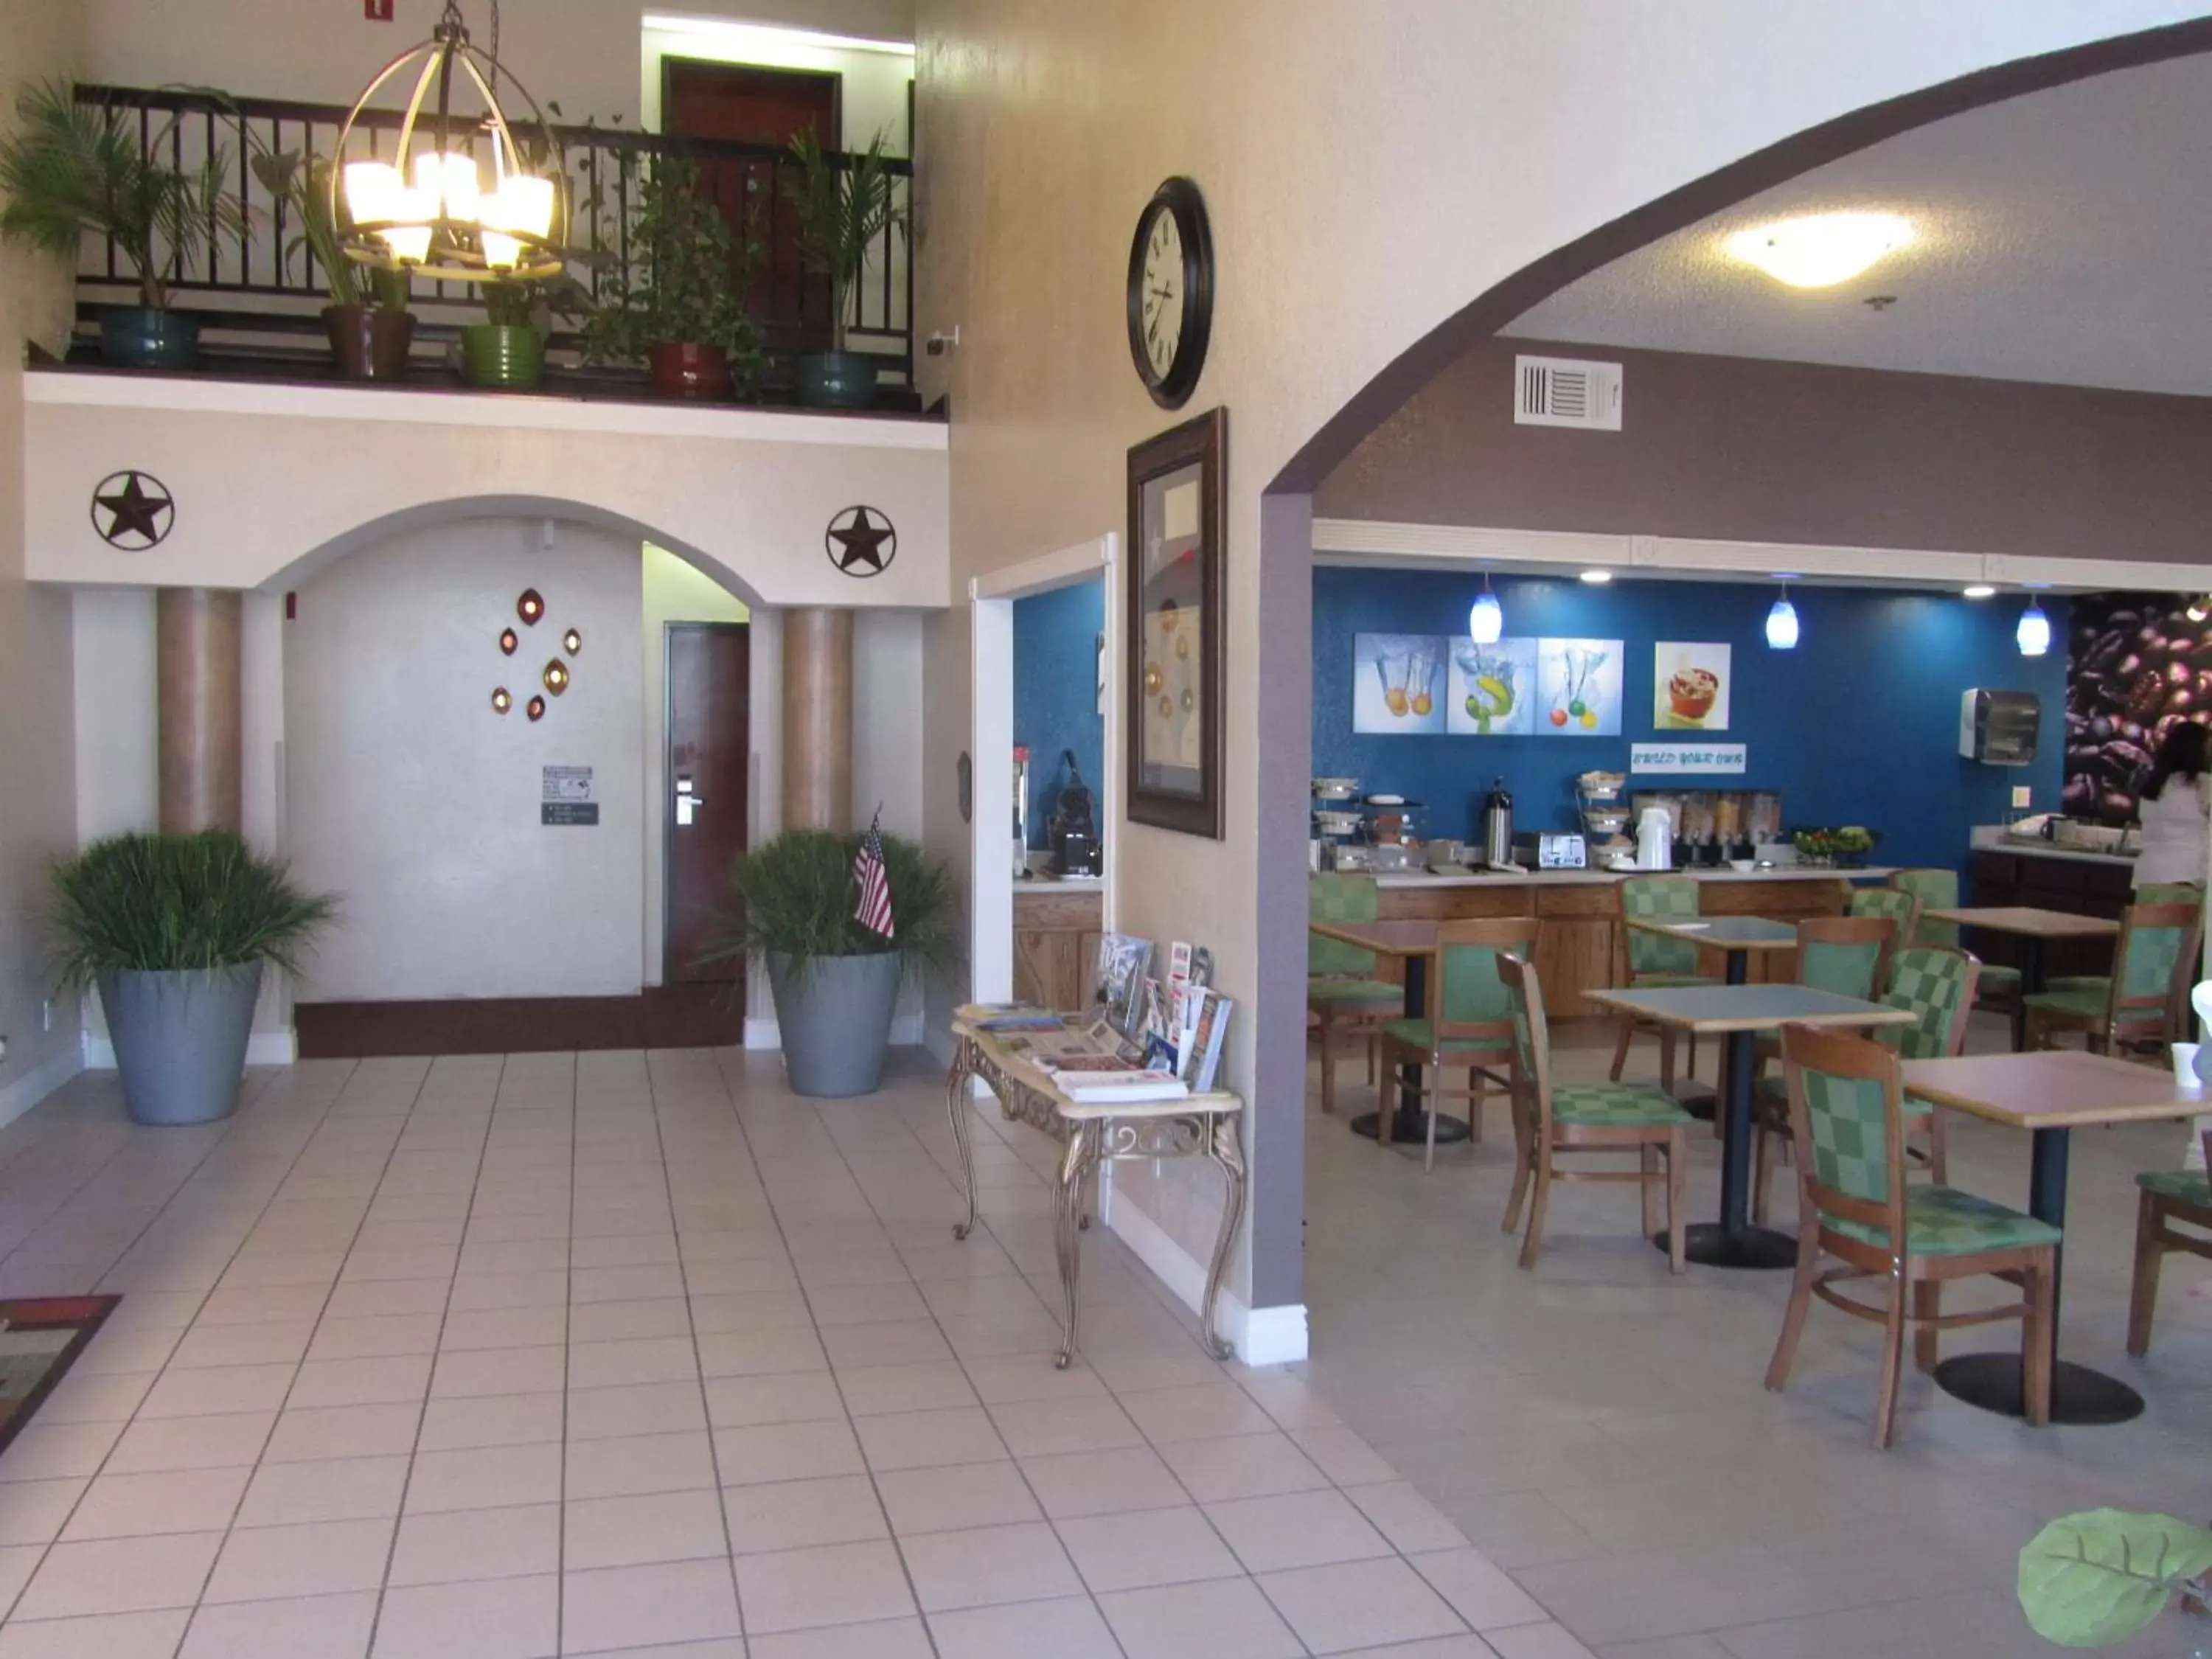 Lobby or reception in Executive Inn and Suites Wichita Falls